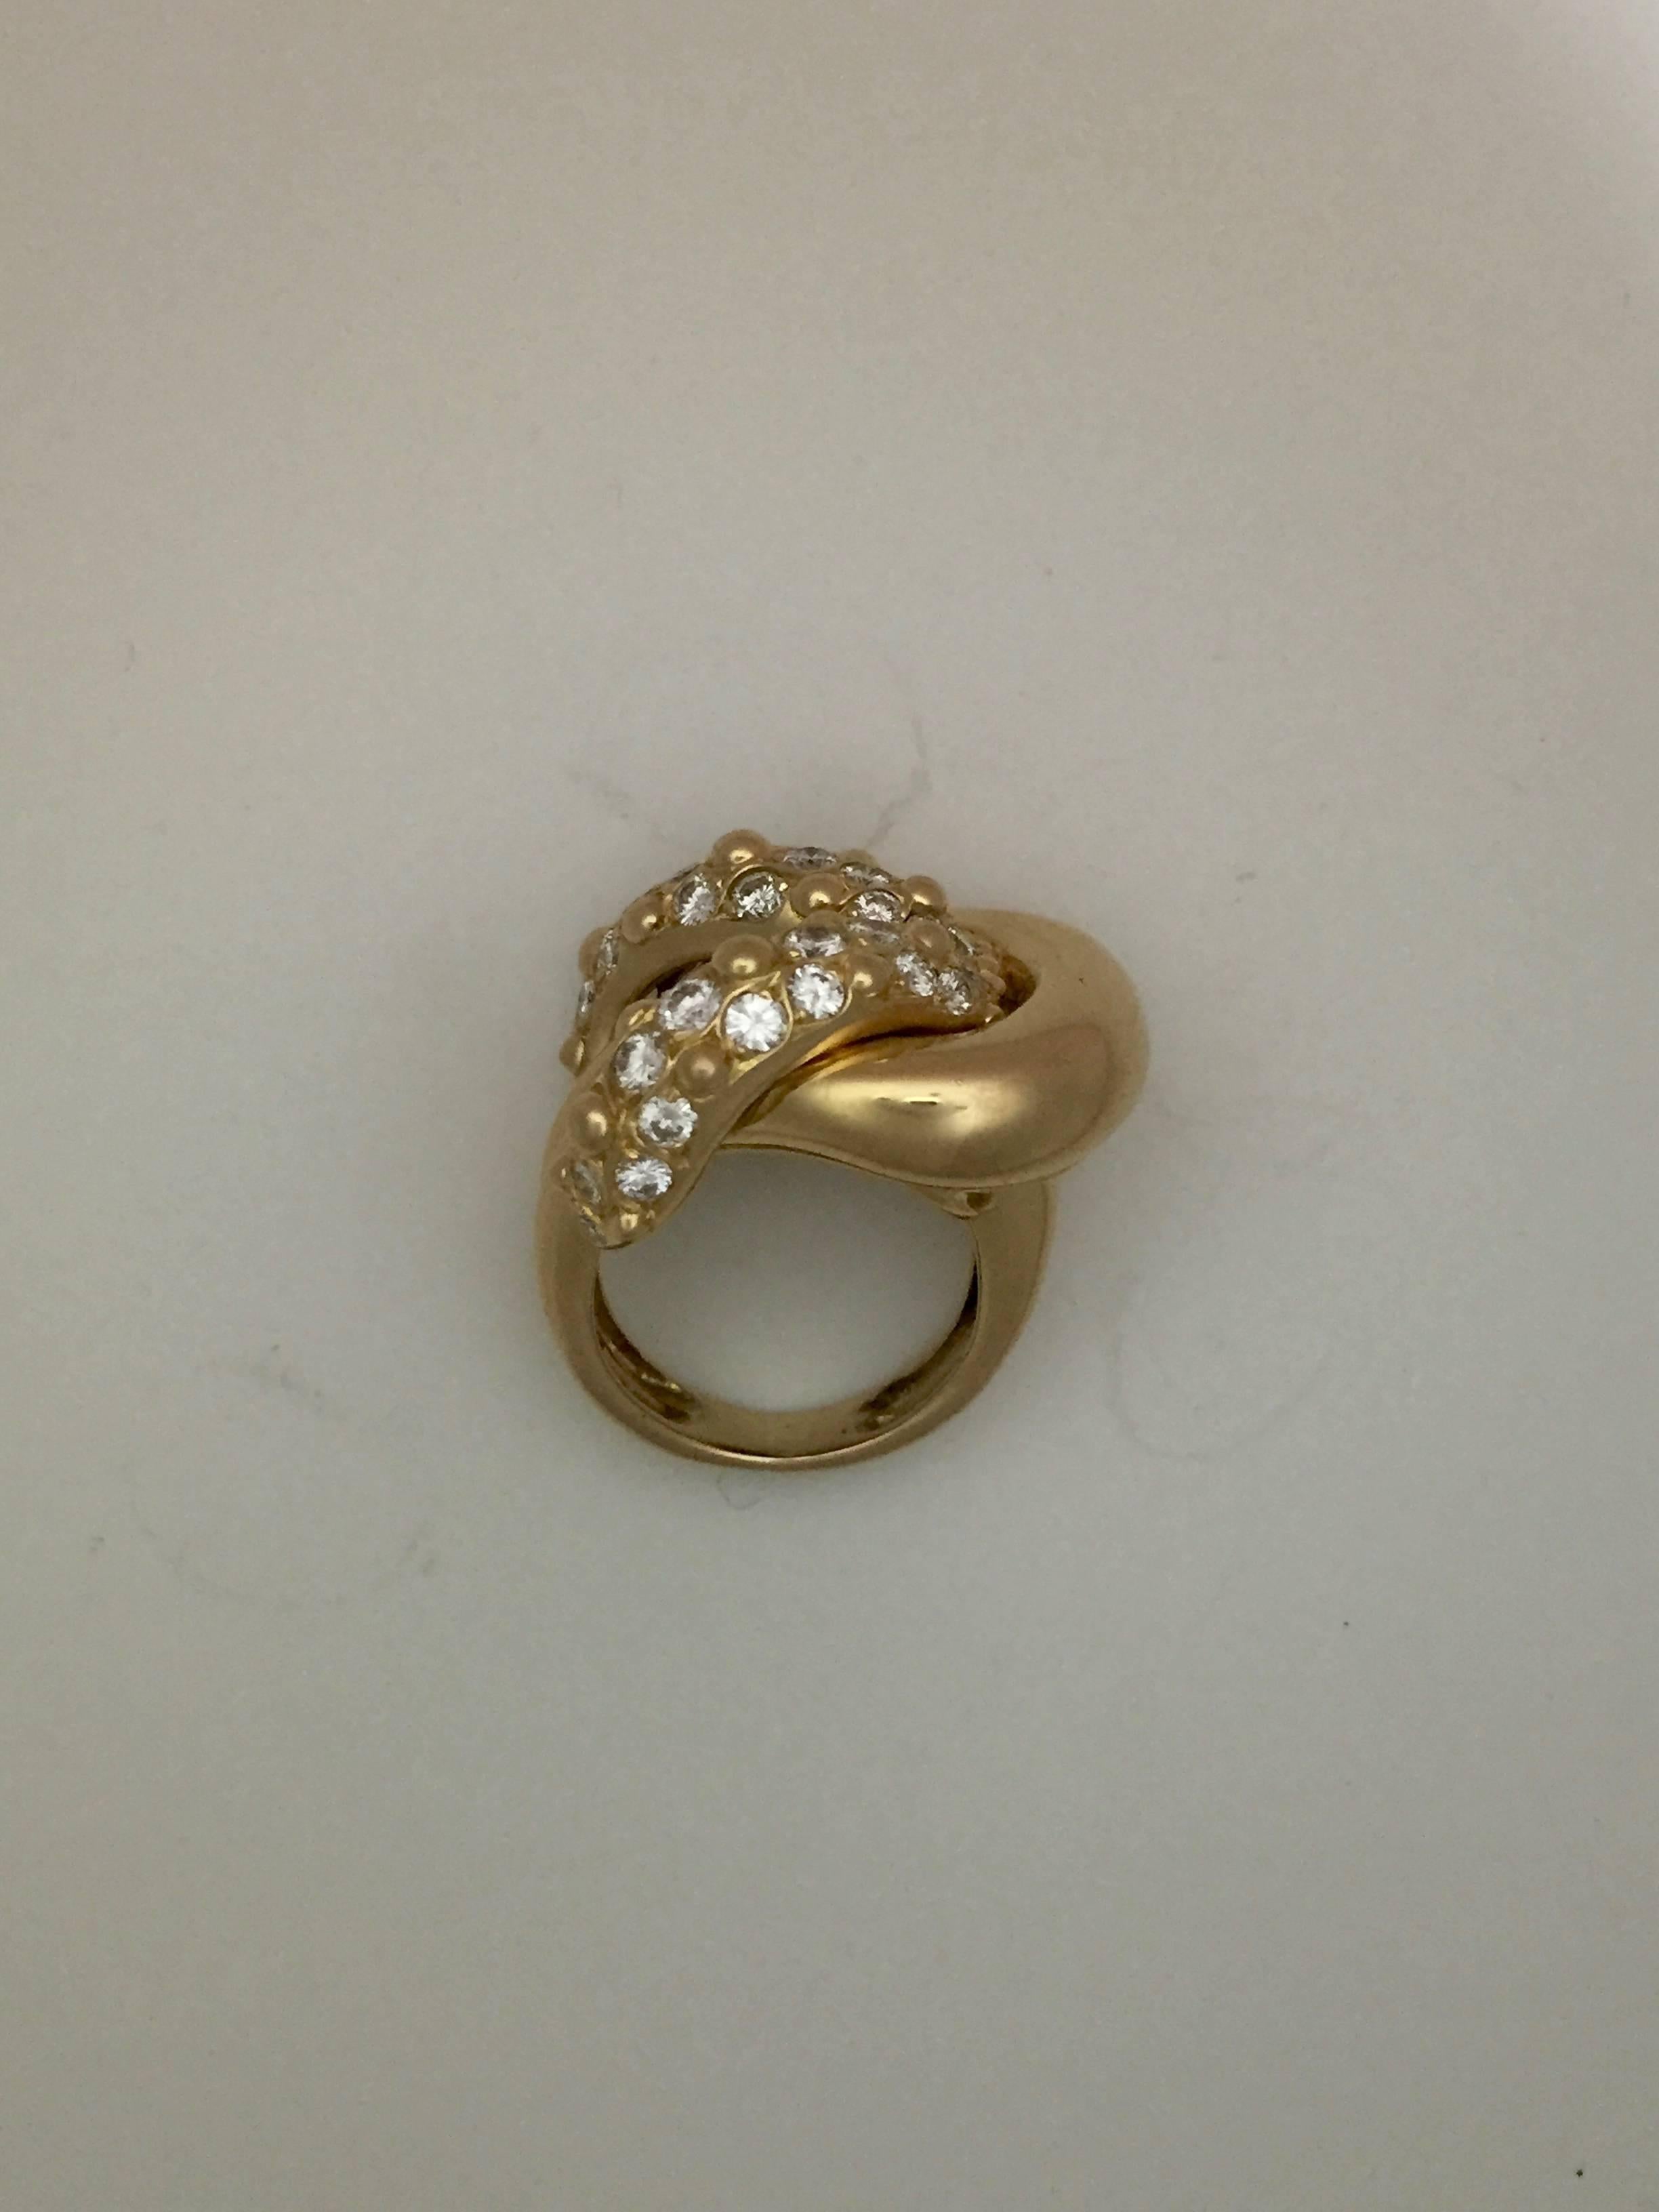 Stylish Van Cleef & Arpels Diamond Gold Slipknot Ring In Excellent Condition For Sale In New York, NY